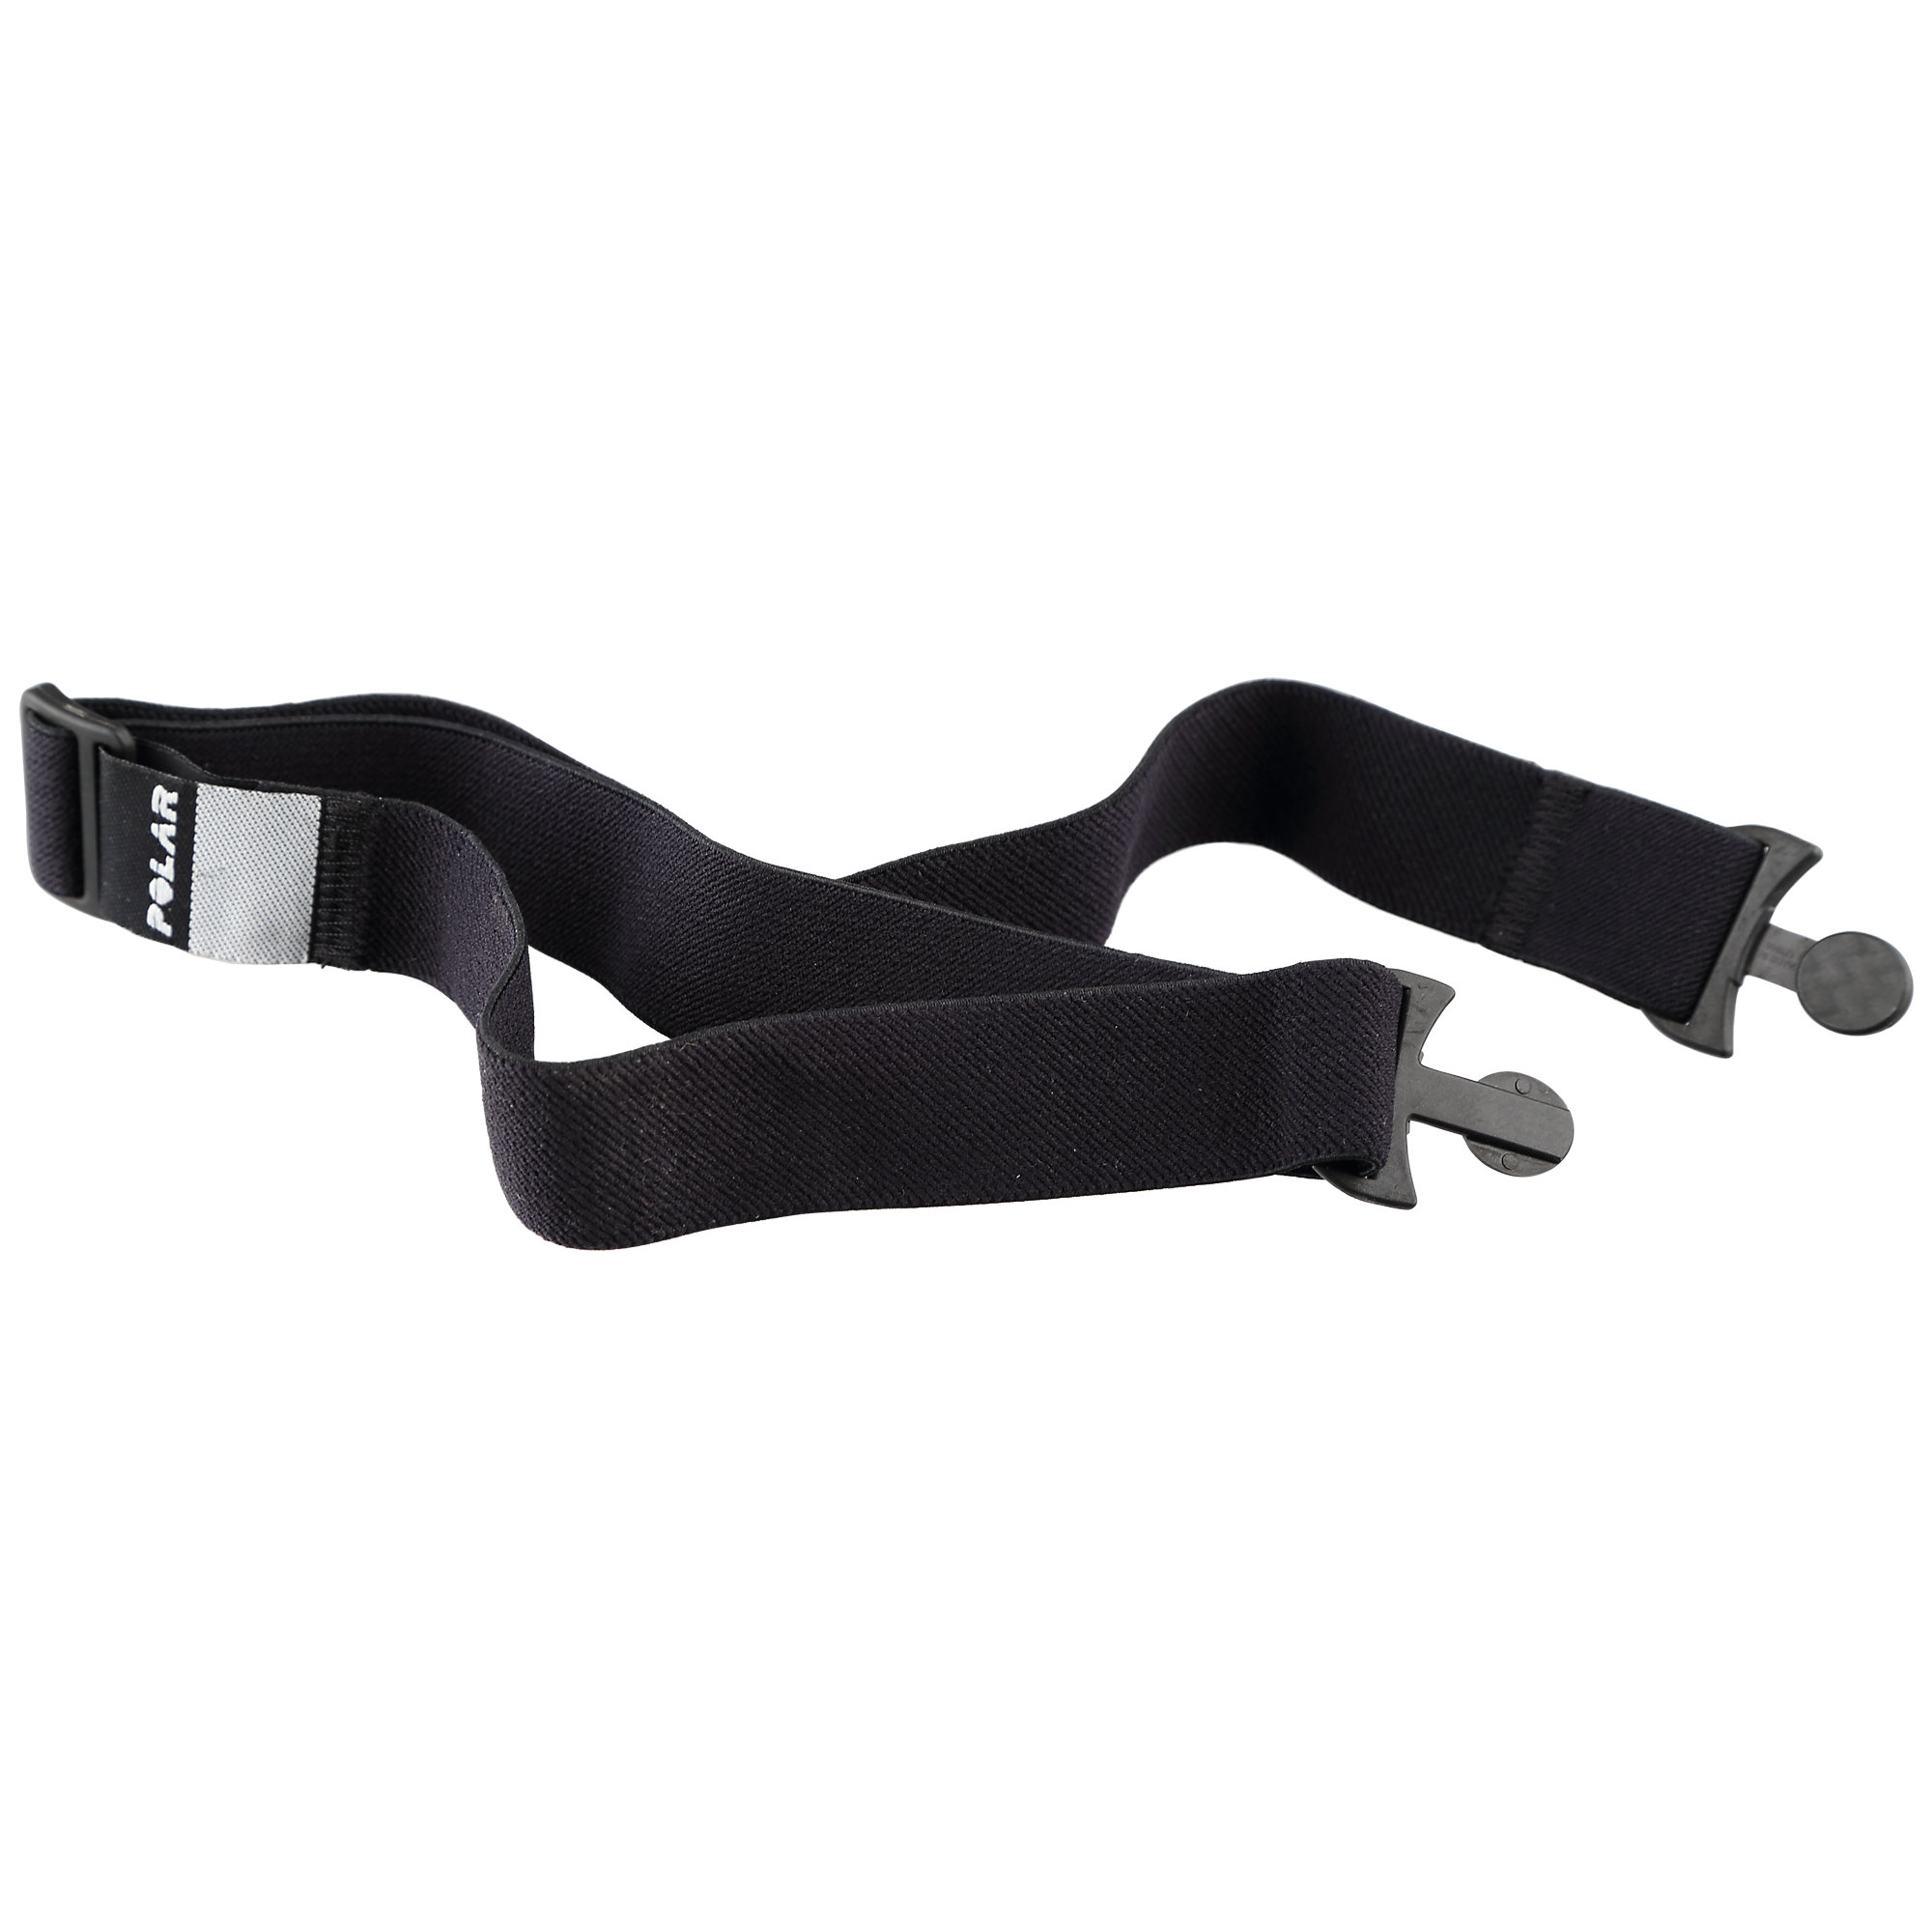 Strap for Optional Pulse Chest Band, Polar